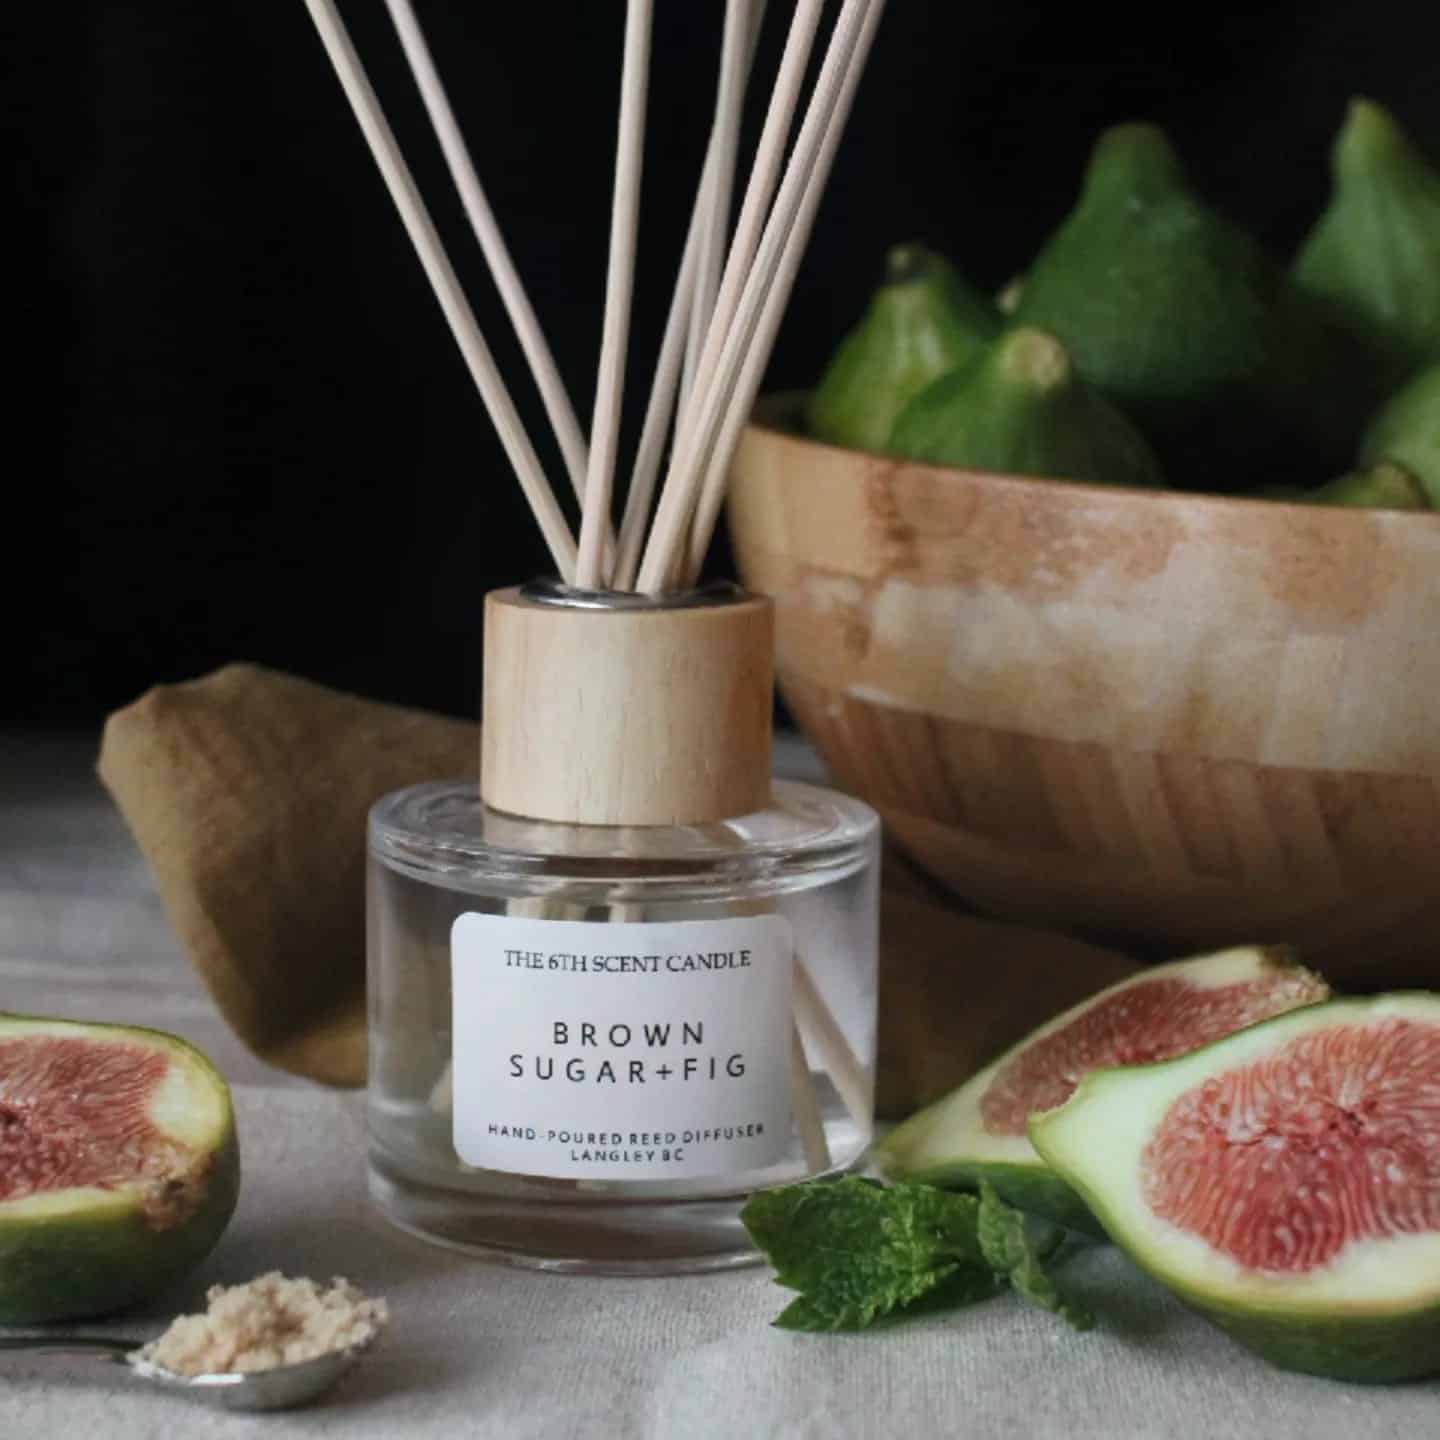 6th Scent Reed Diffuser